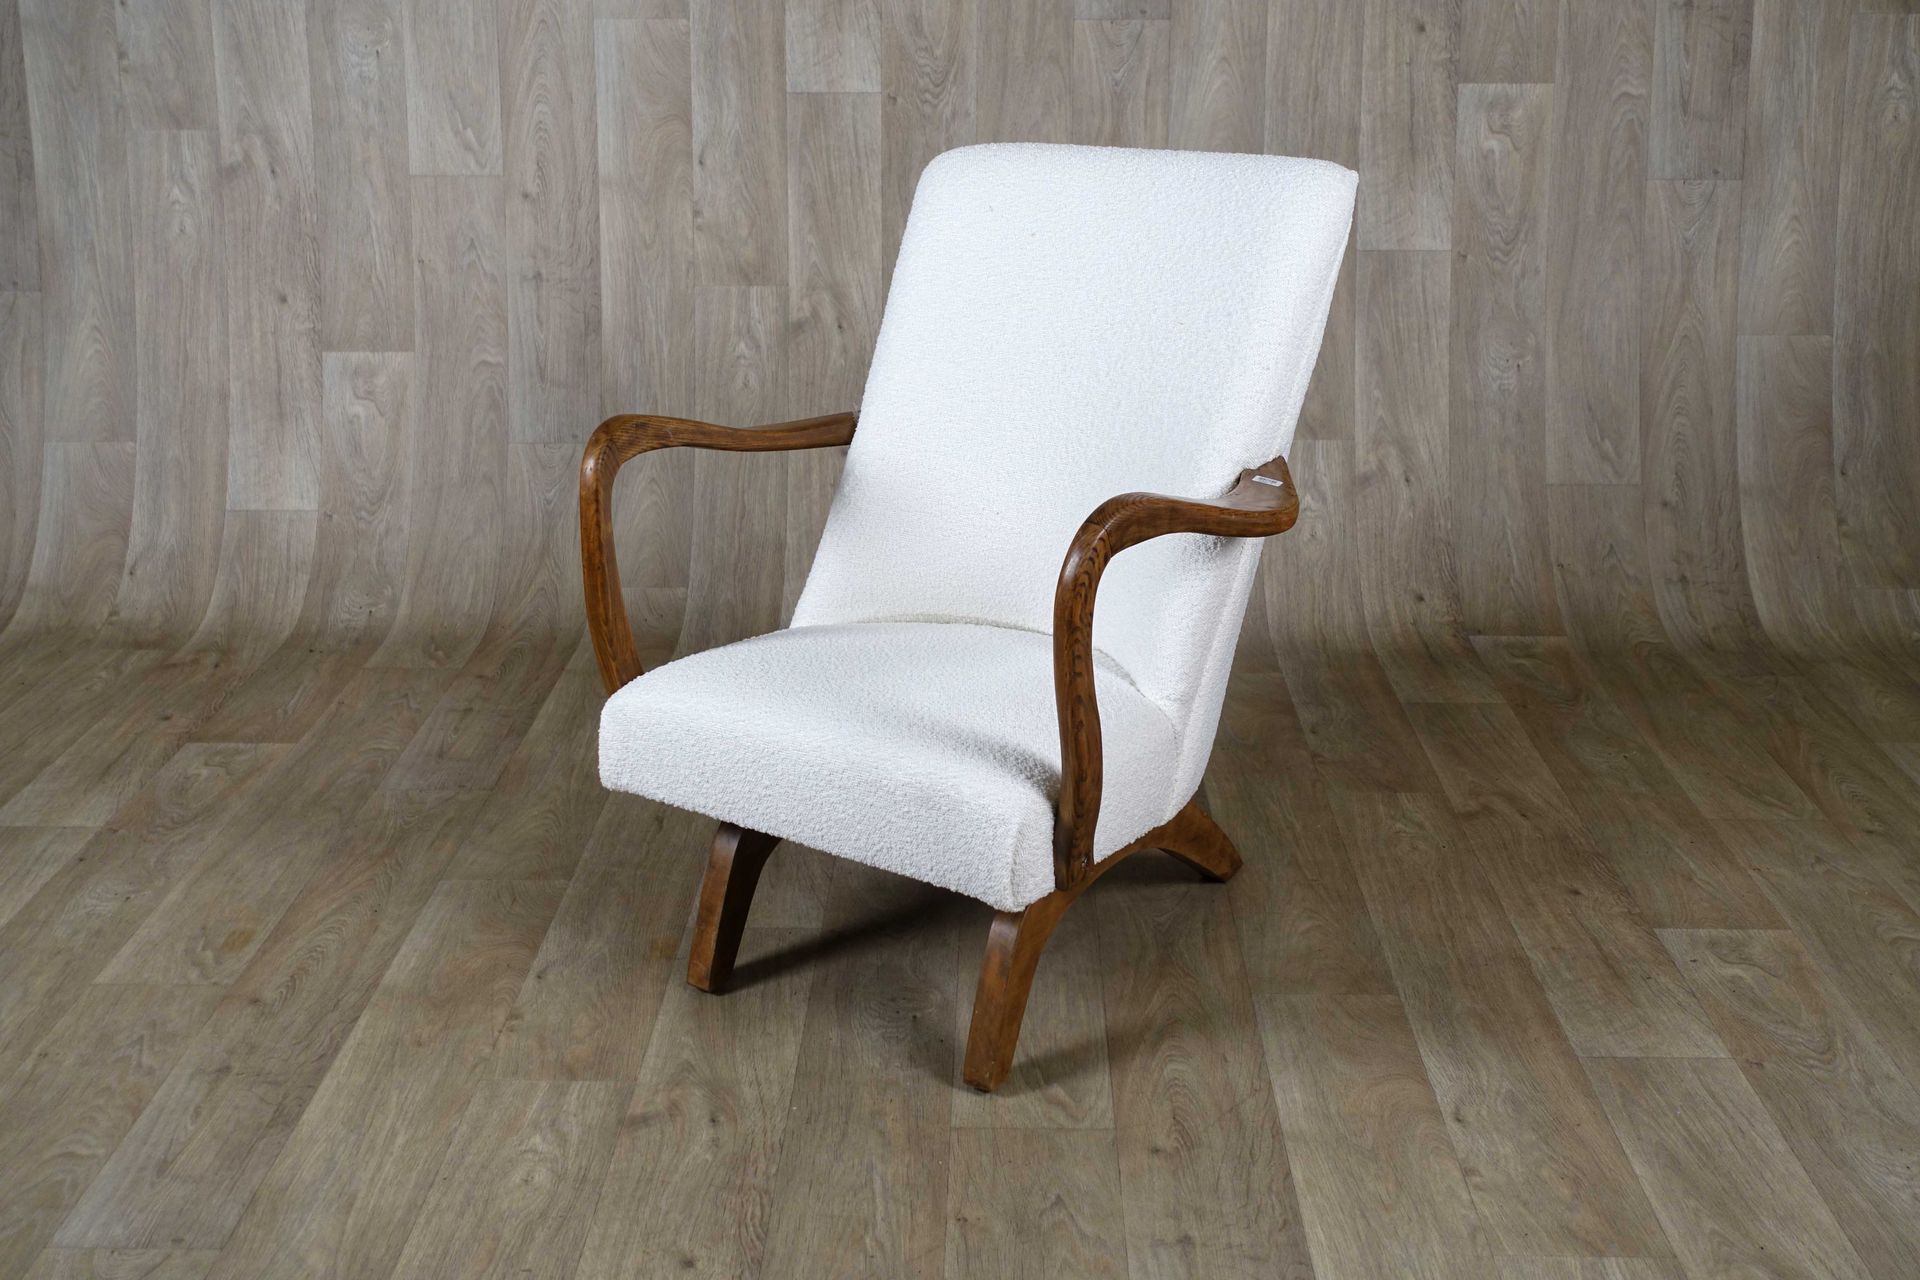 Fauteuil-berceuse. Reclining seat and sinuous armrests. Legs in braces. Elm upho&hellip;